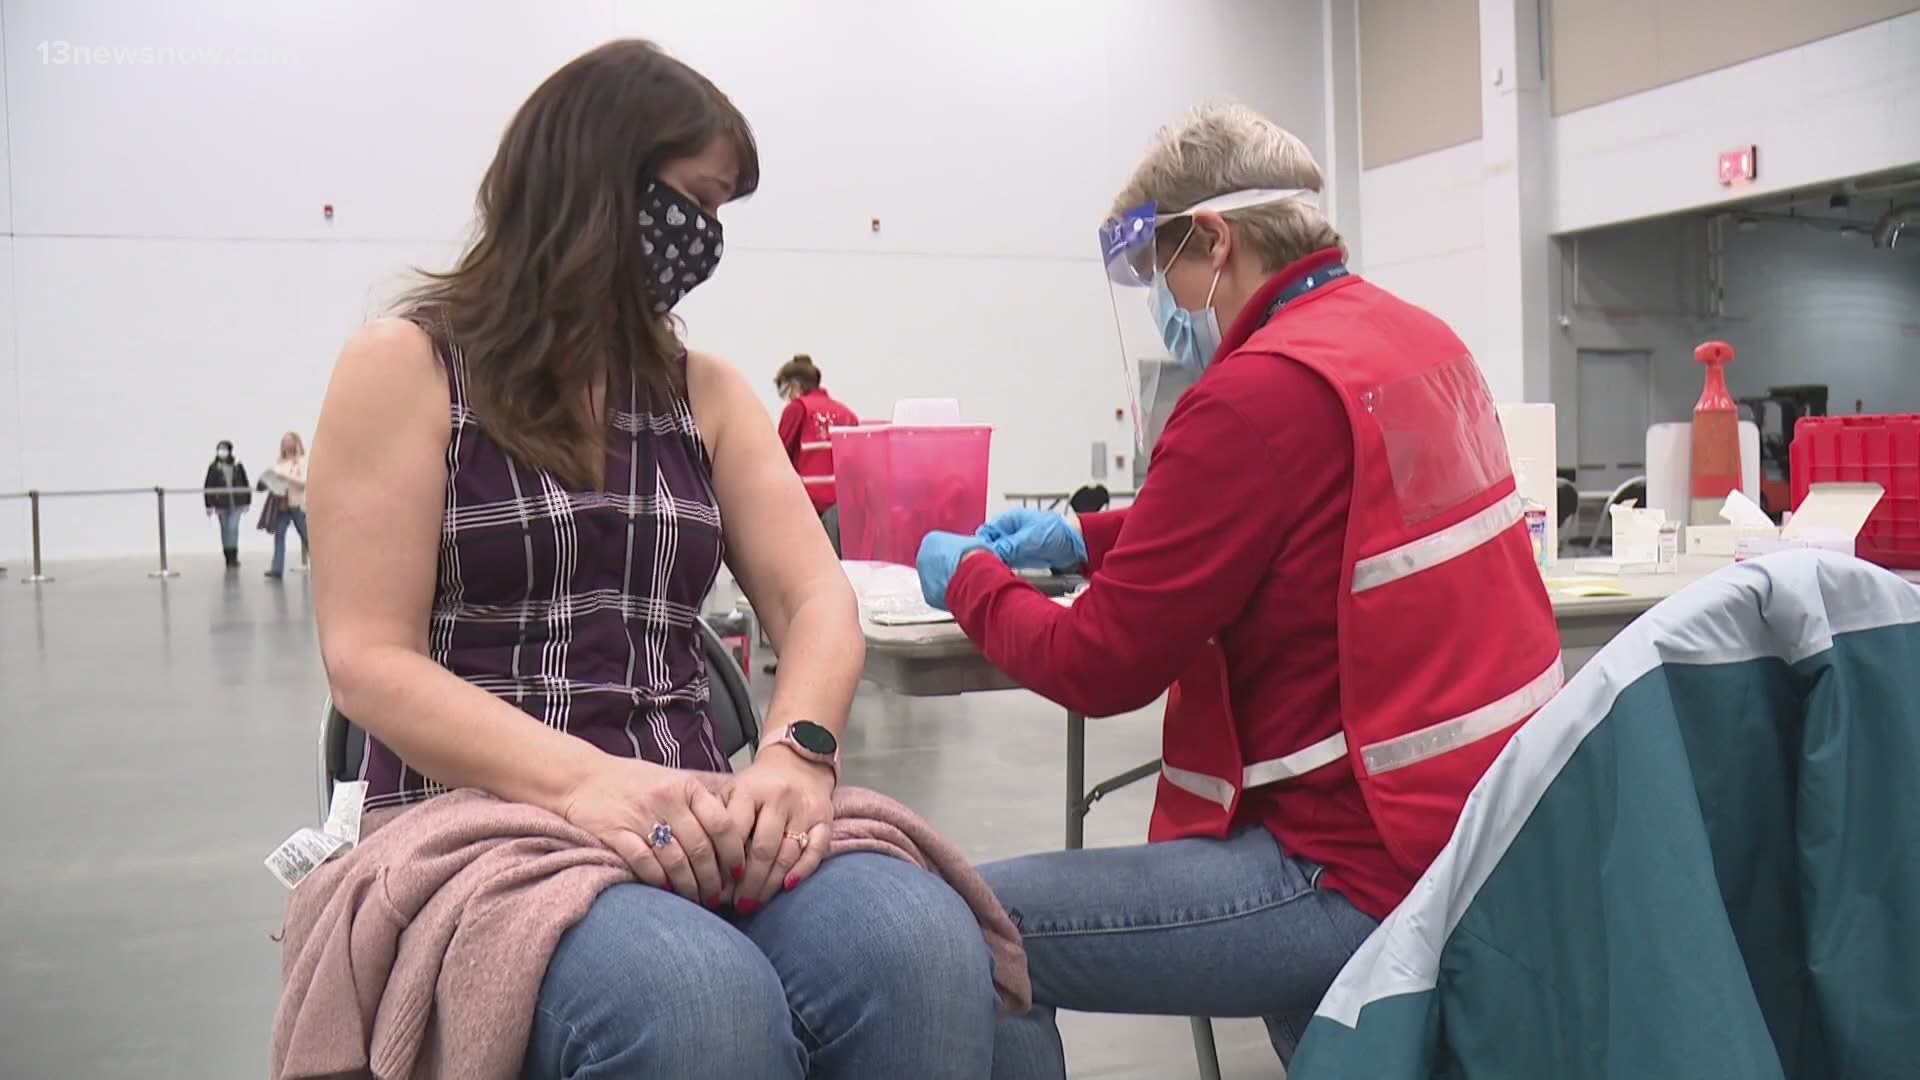 As more and more people push to get the coronavirus vaccine, some are running into issues making their appointment.